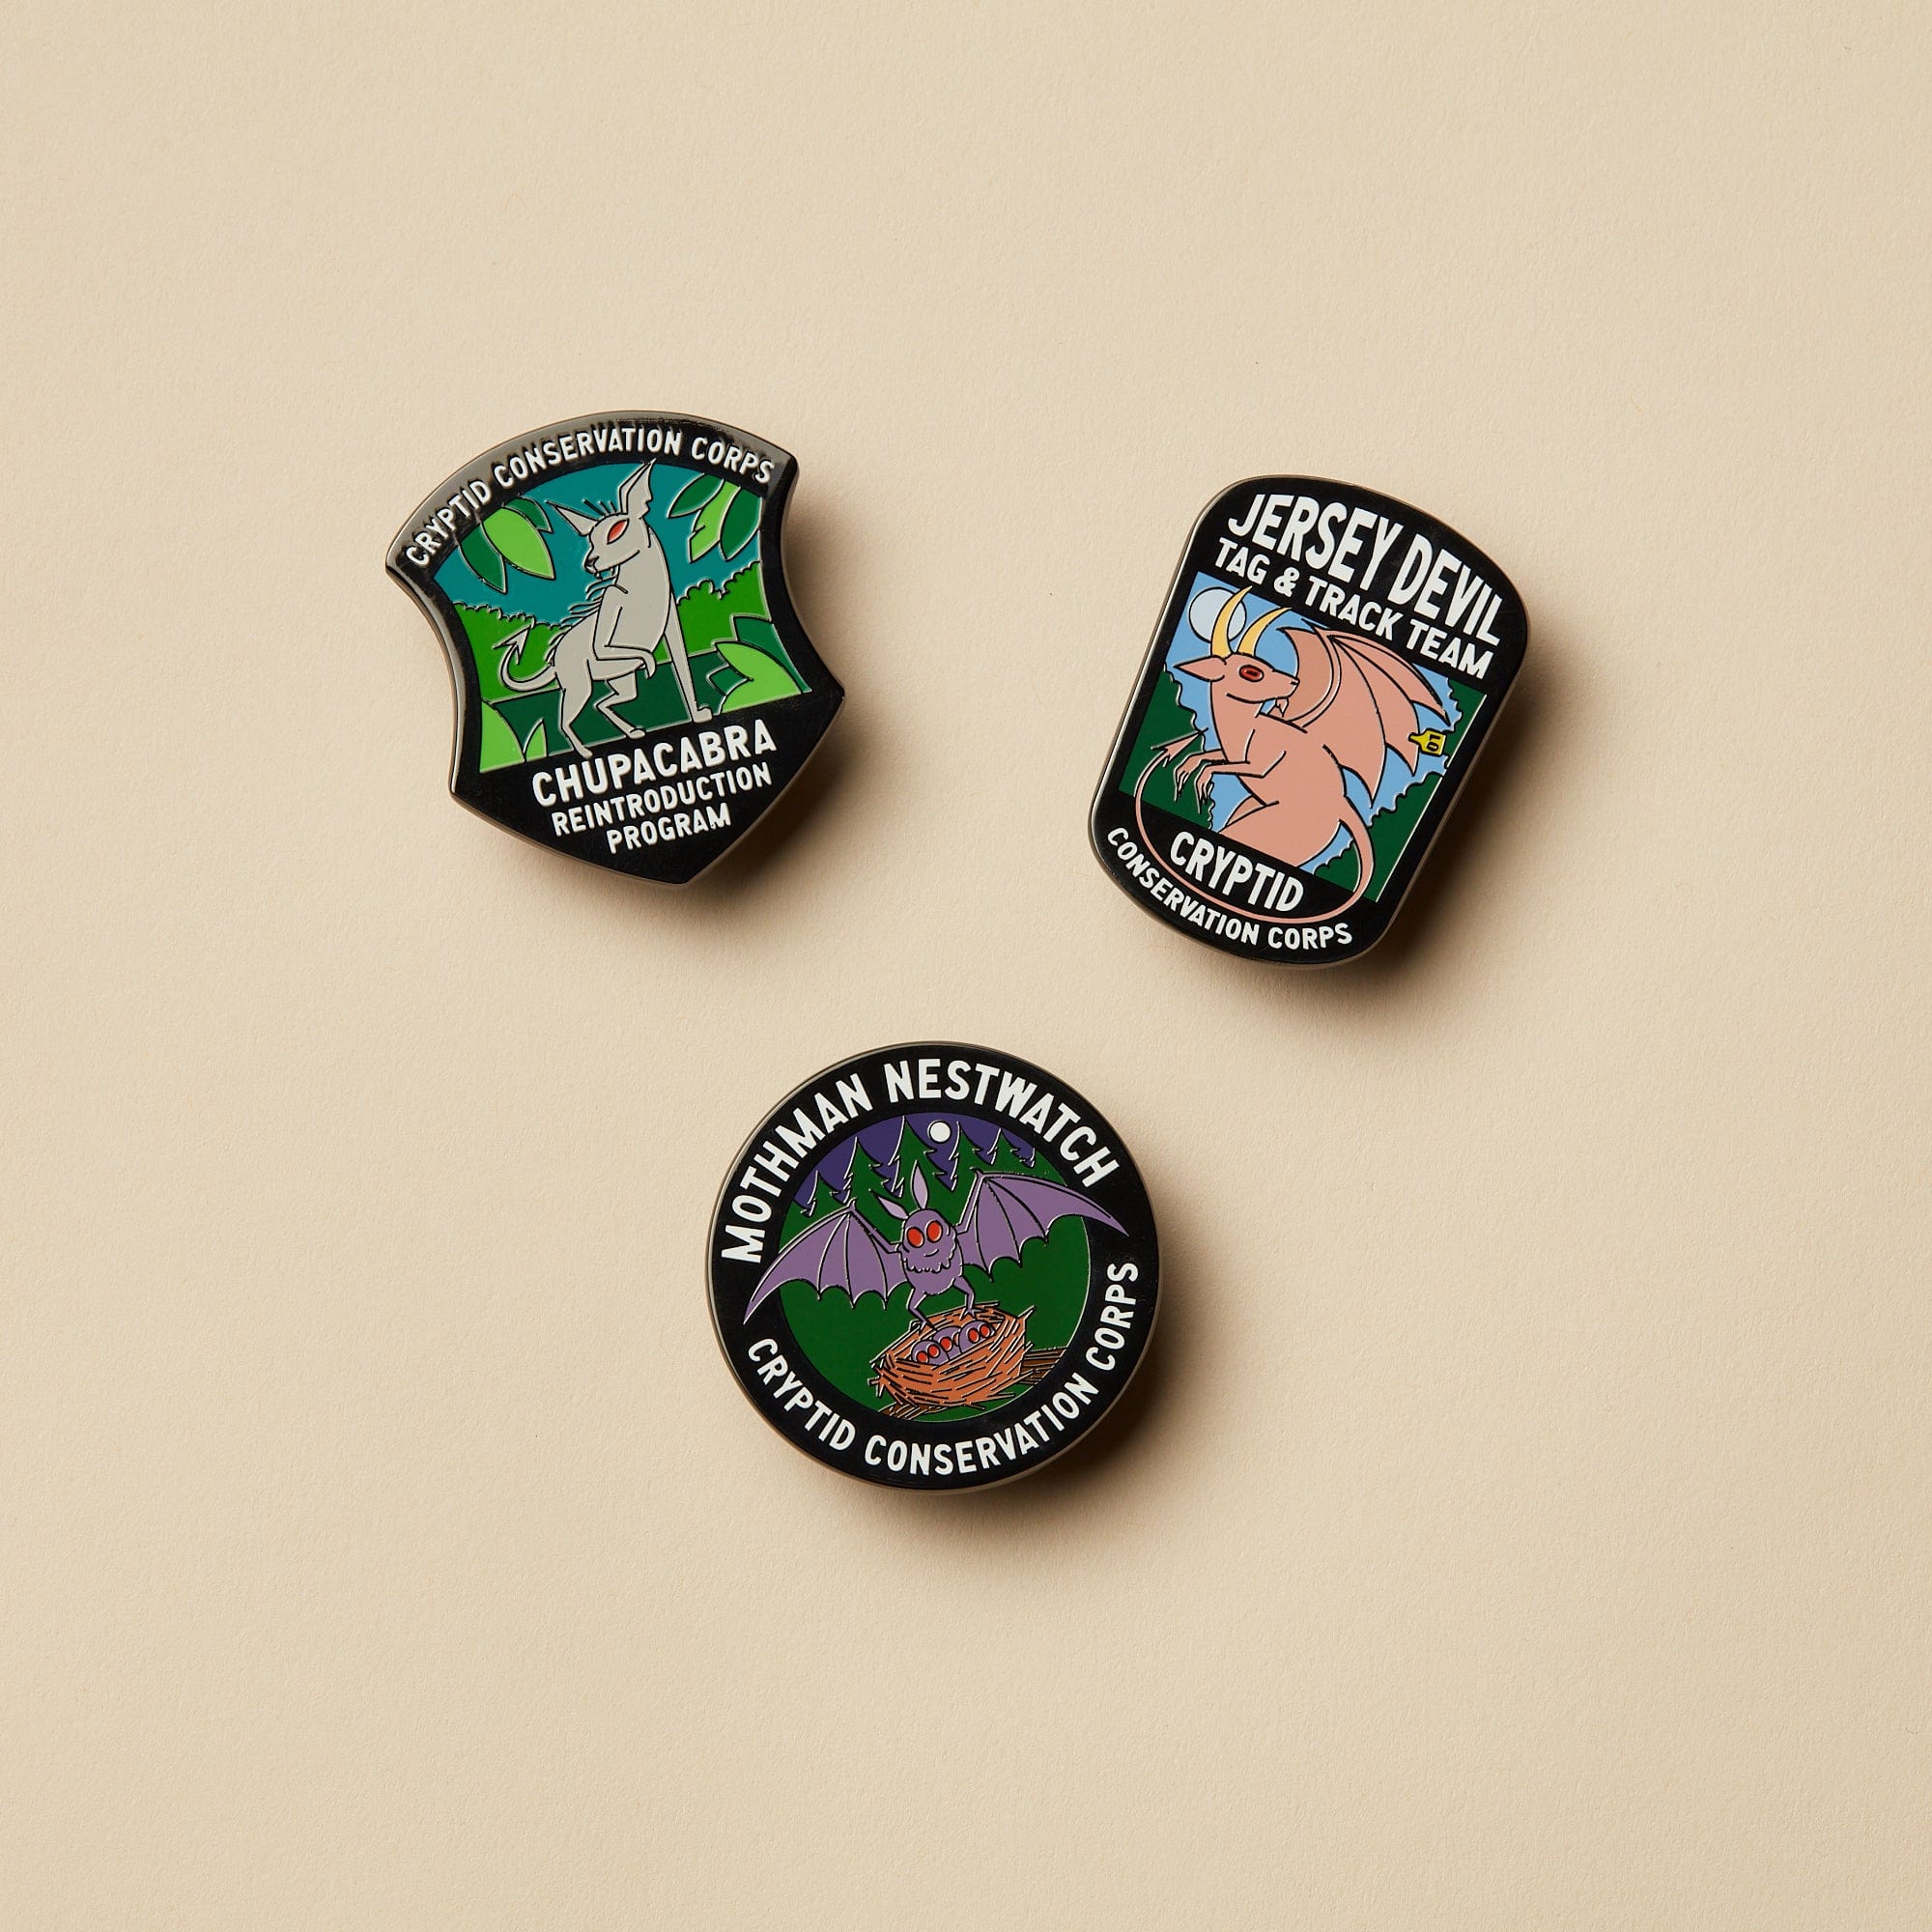 Cryptid Conservation Corps: All Series 2 Patches, Pins, and Stickers Set